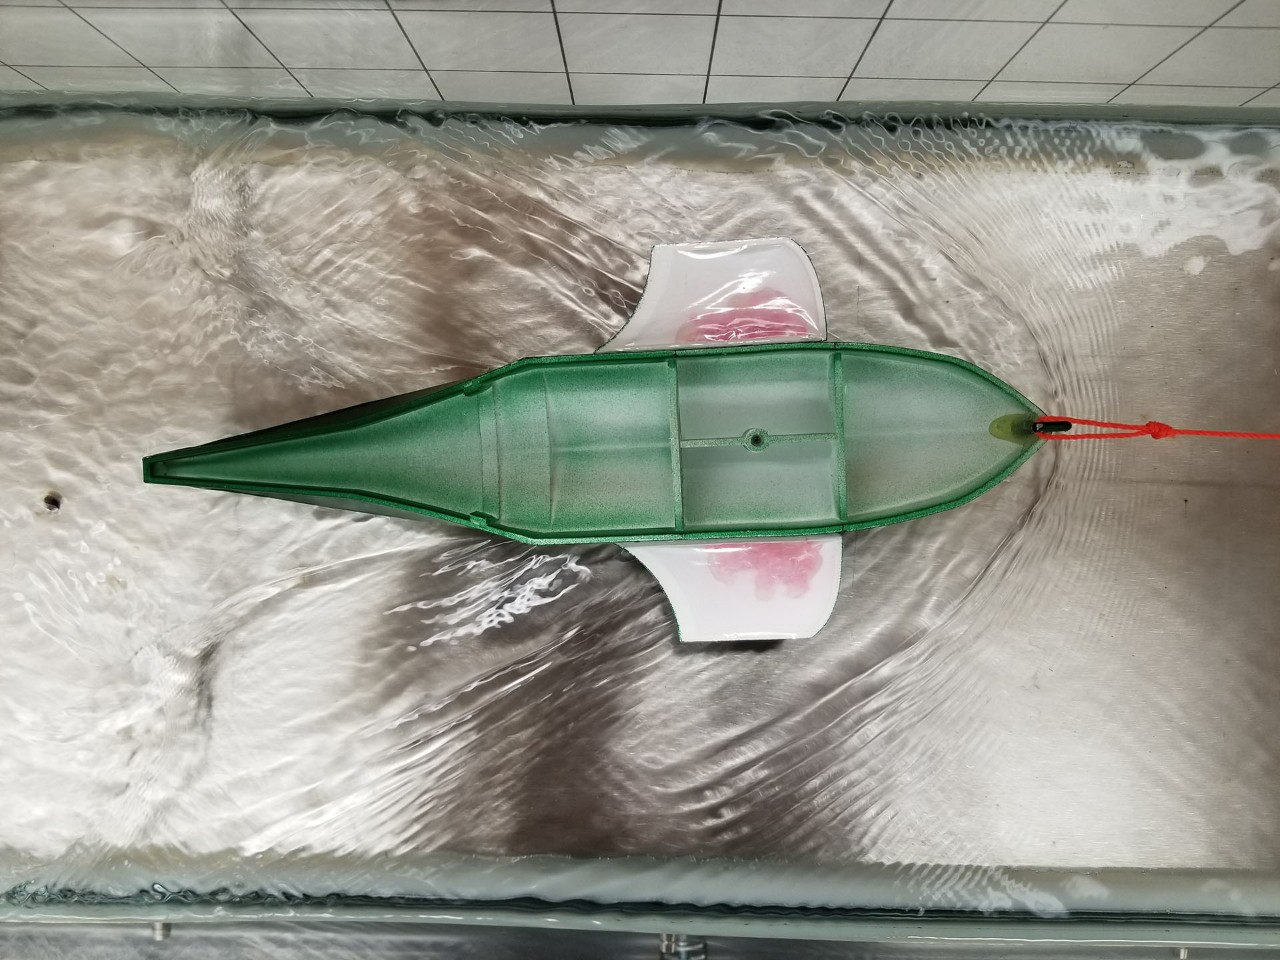 The image shows a small-scale green 3D printed hull floating in water during a water test from the 2017-2018 AERO490 multidisciplinary aerospace capstone group at Concordia University for their light amphibious aircraft design.